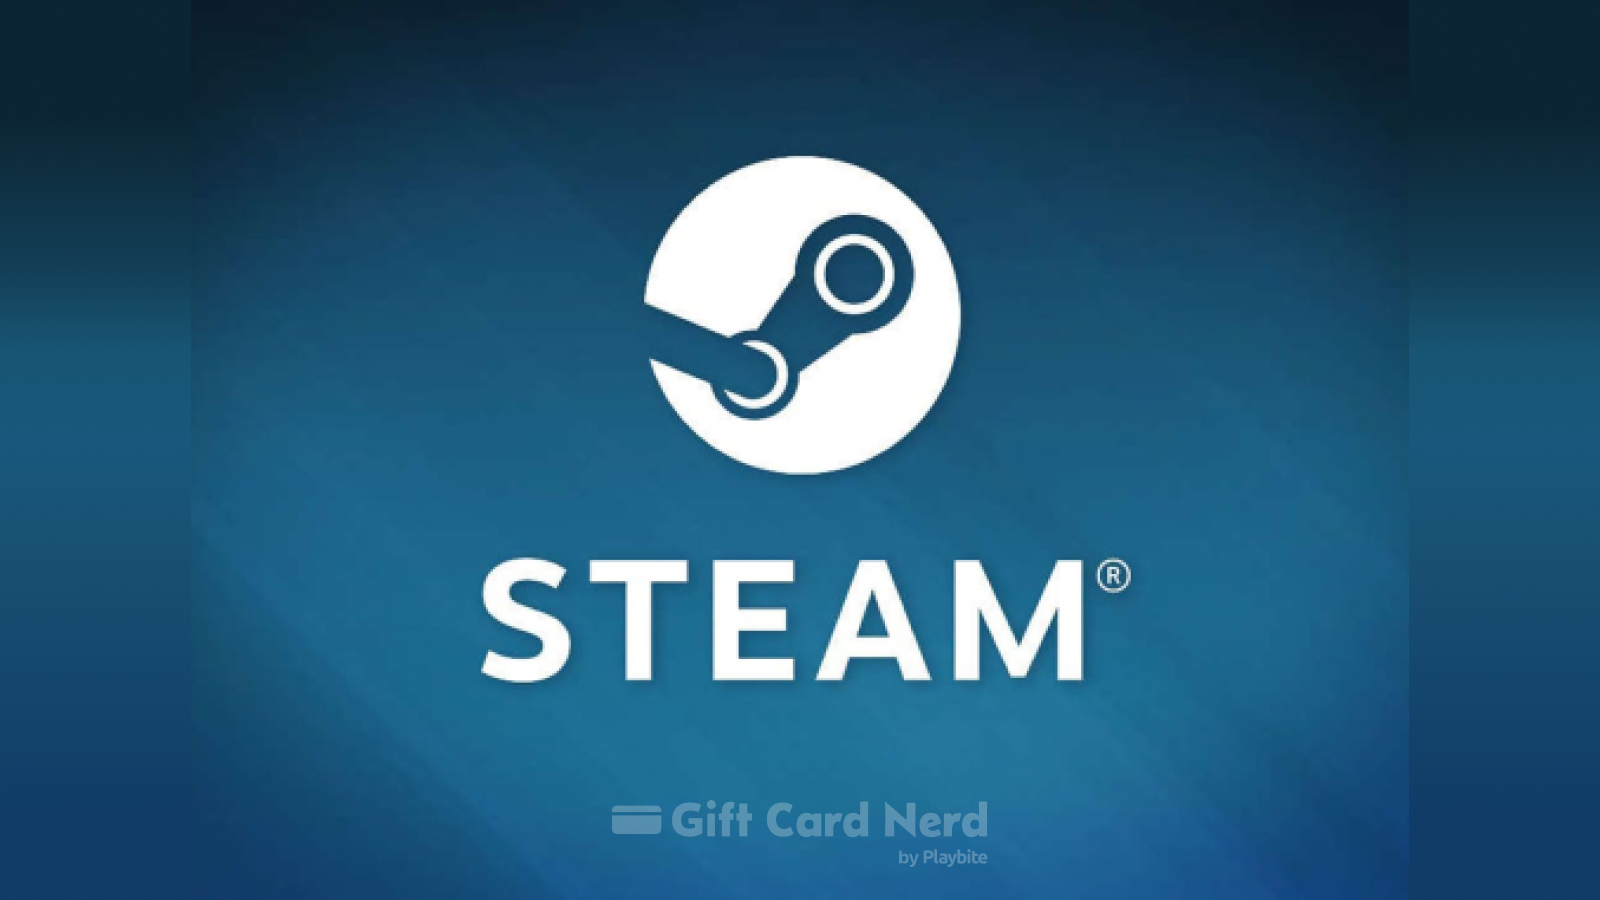 Can I Use a Steam Gift Card on Steam?